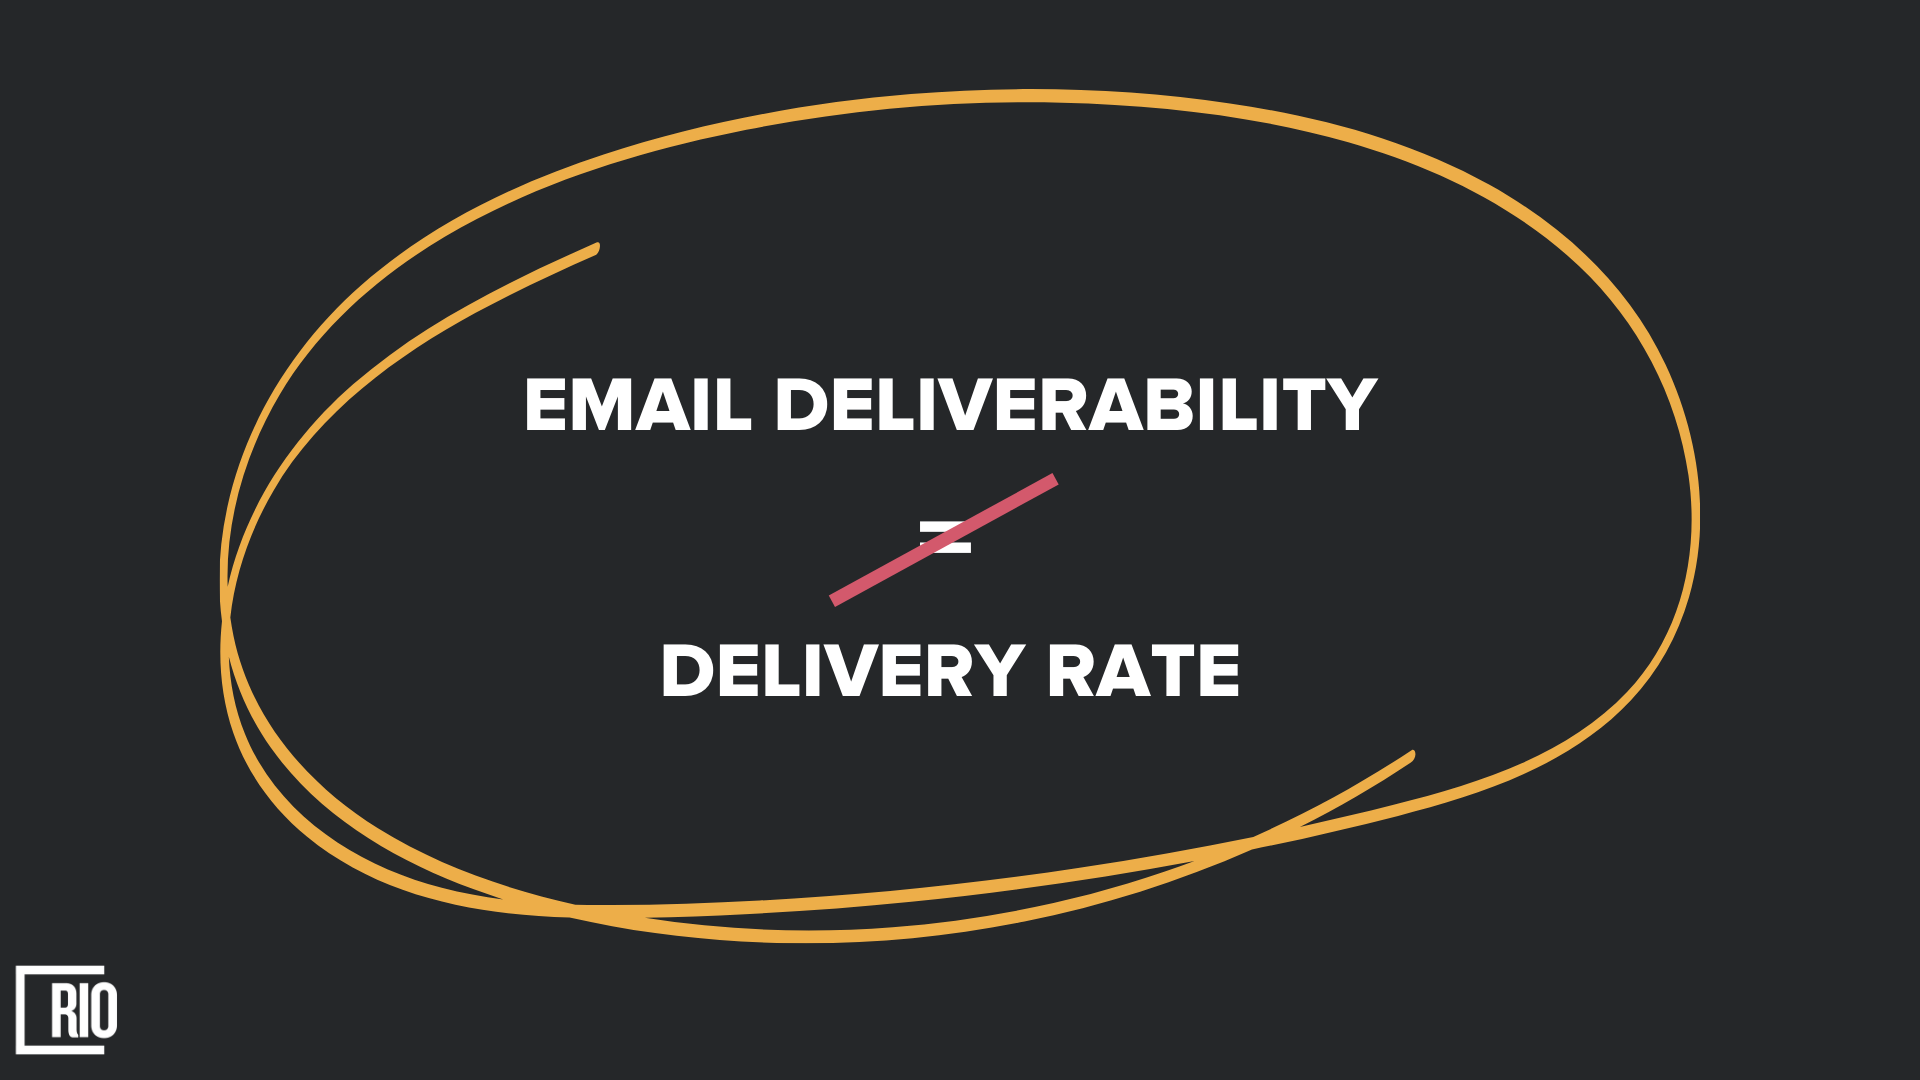 Email Deliverability is not same as Delivery Rate